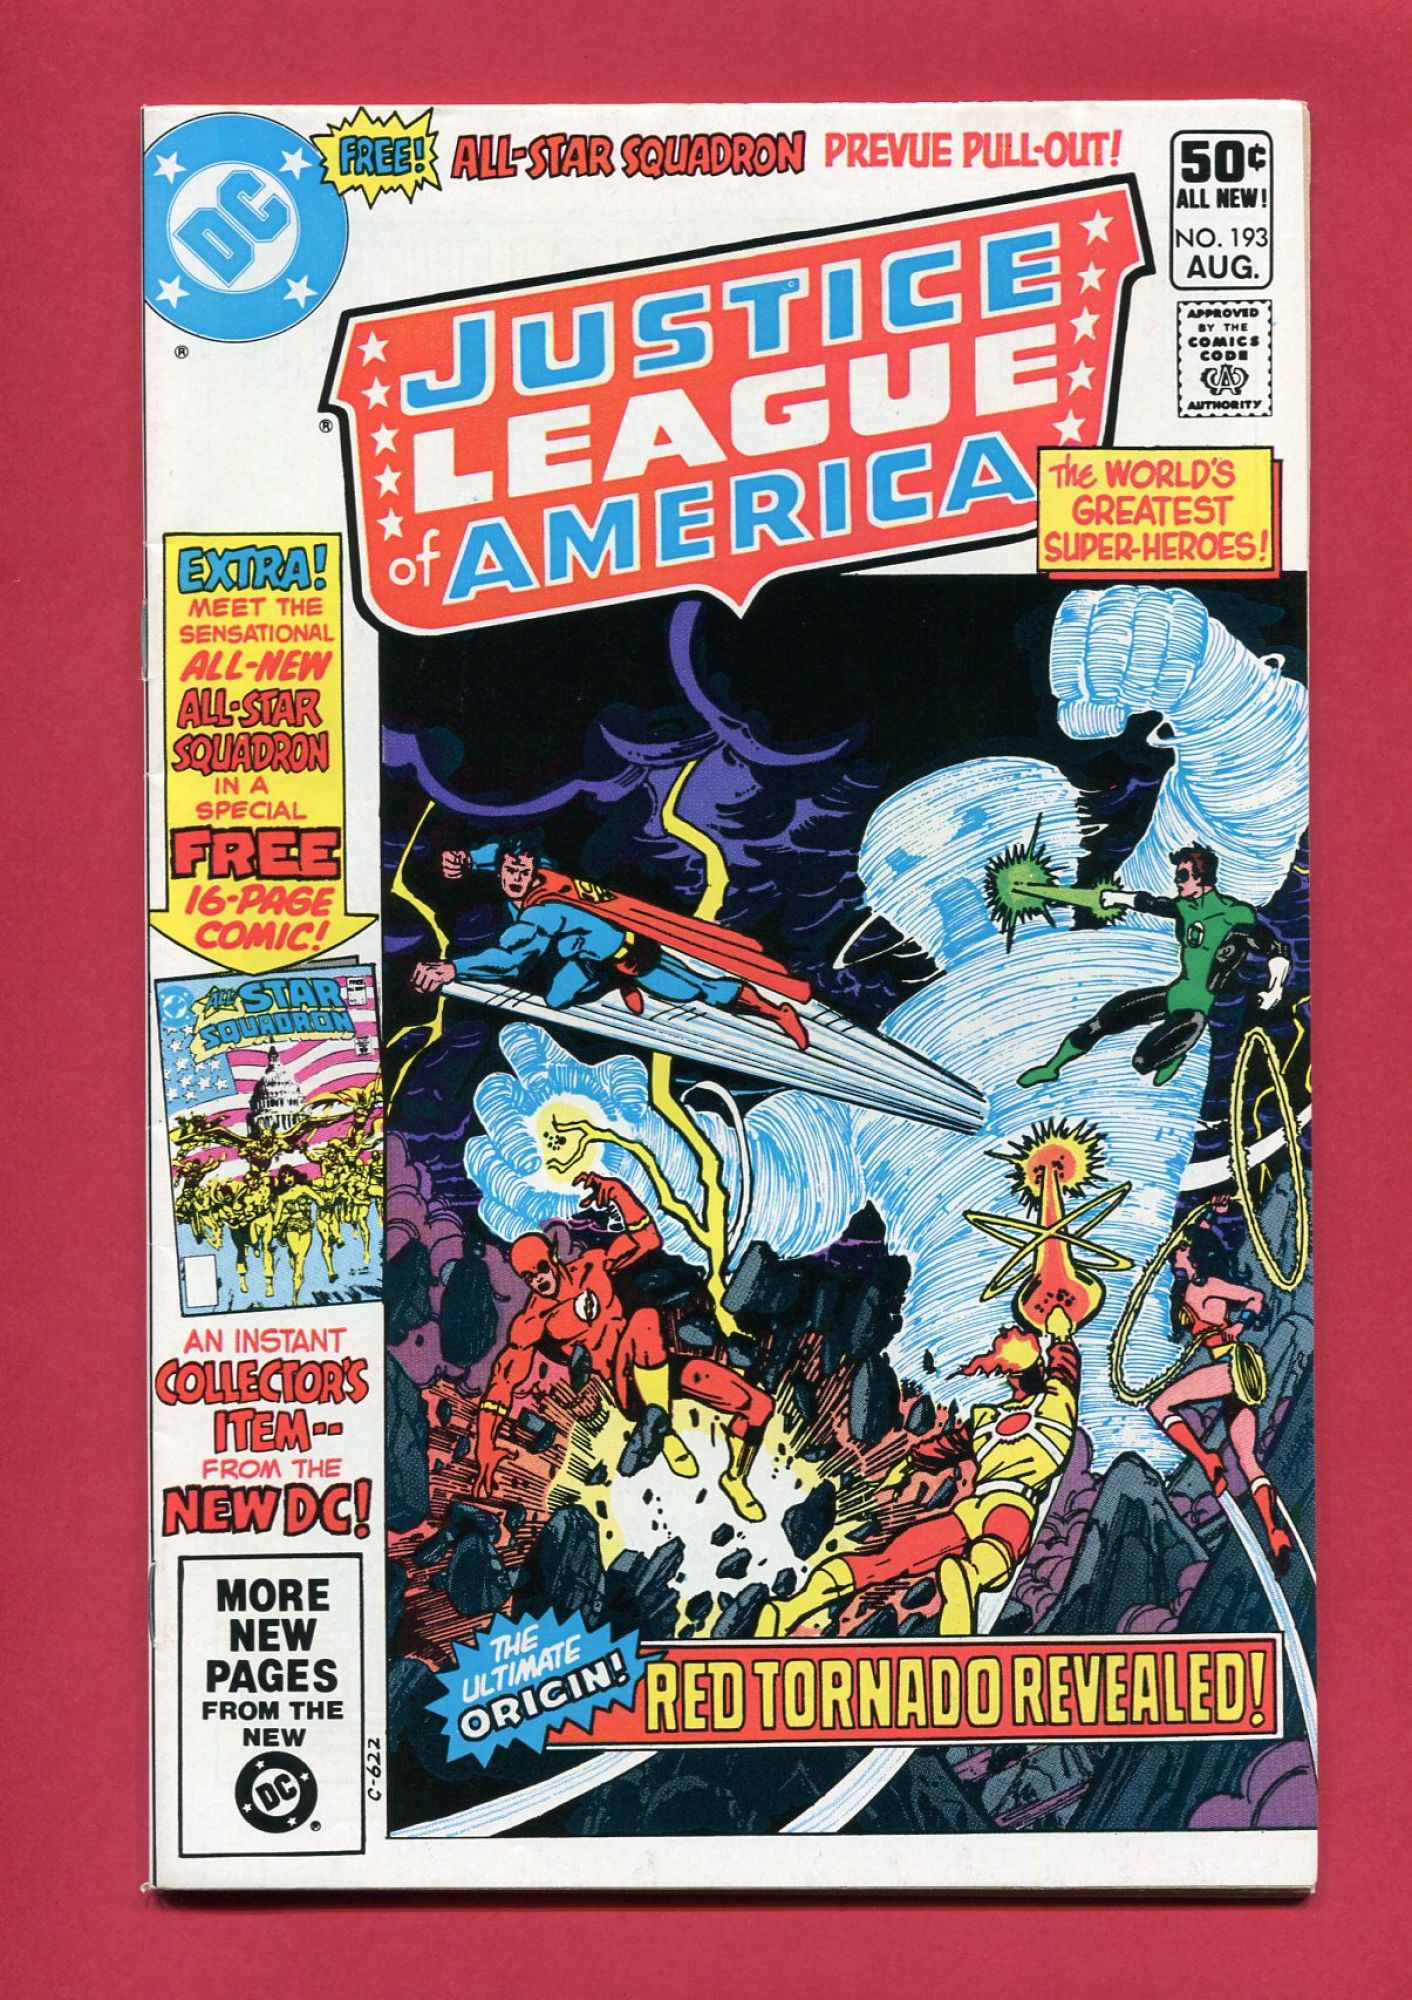 Justice League of America #193, Aug 1981, 8.0 VF